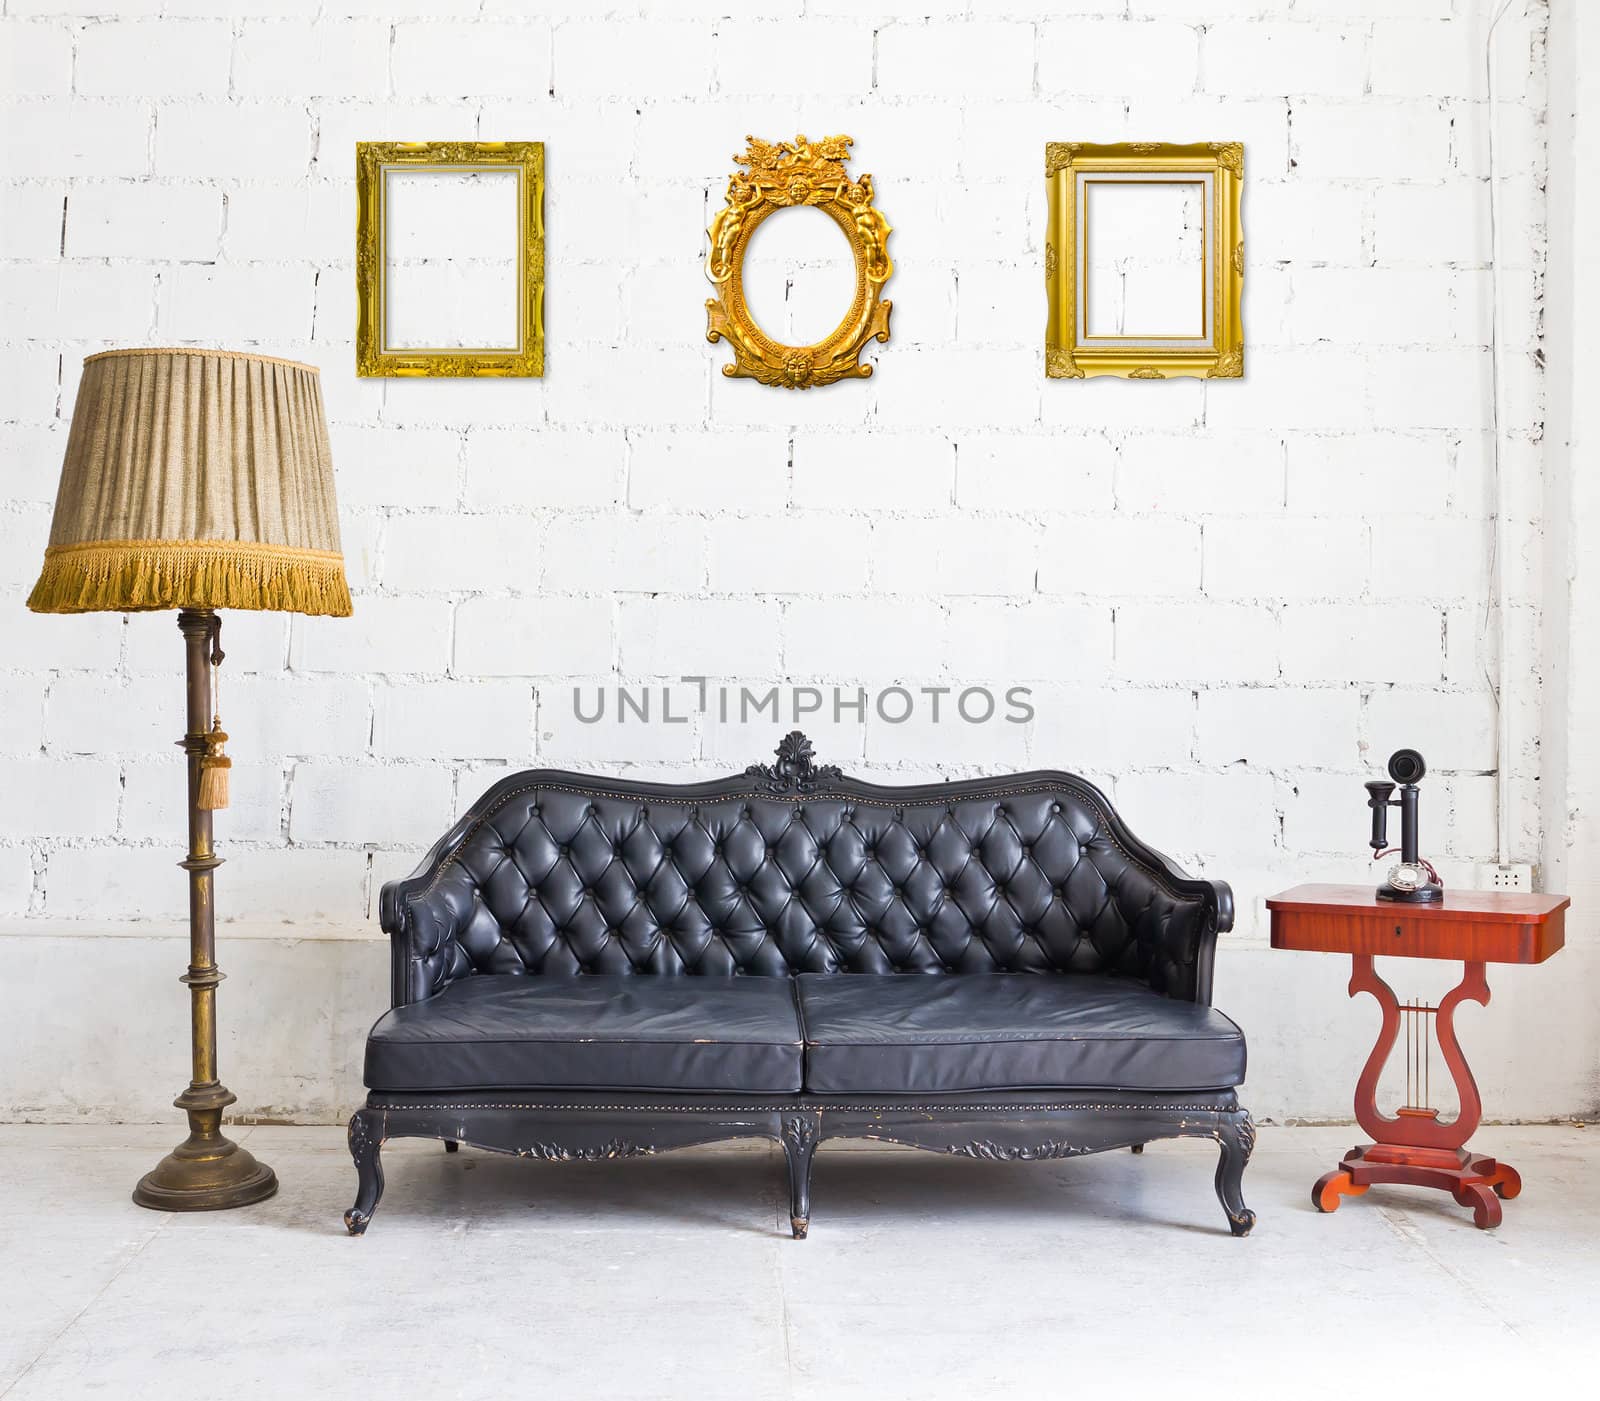 vintage luxury armchair in white room  by tungphoto